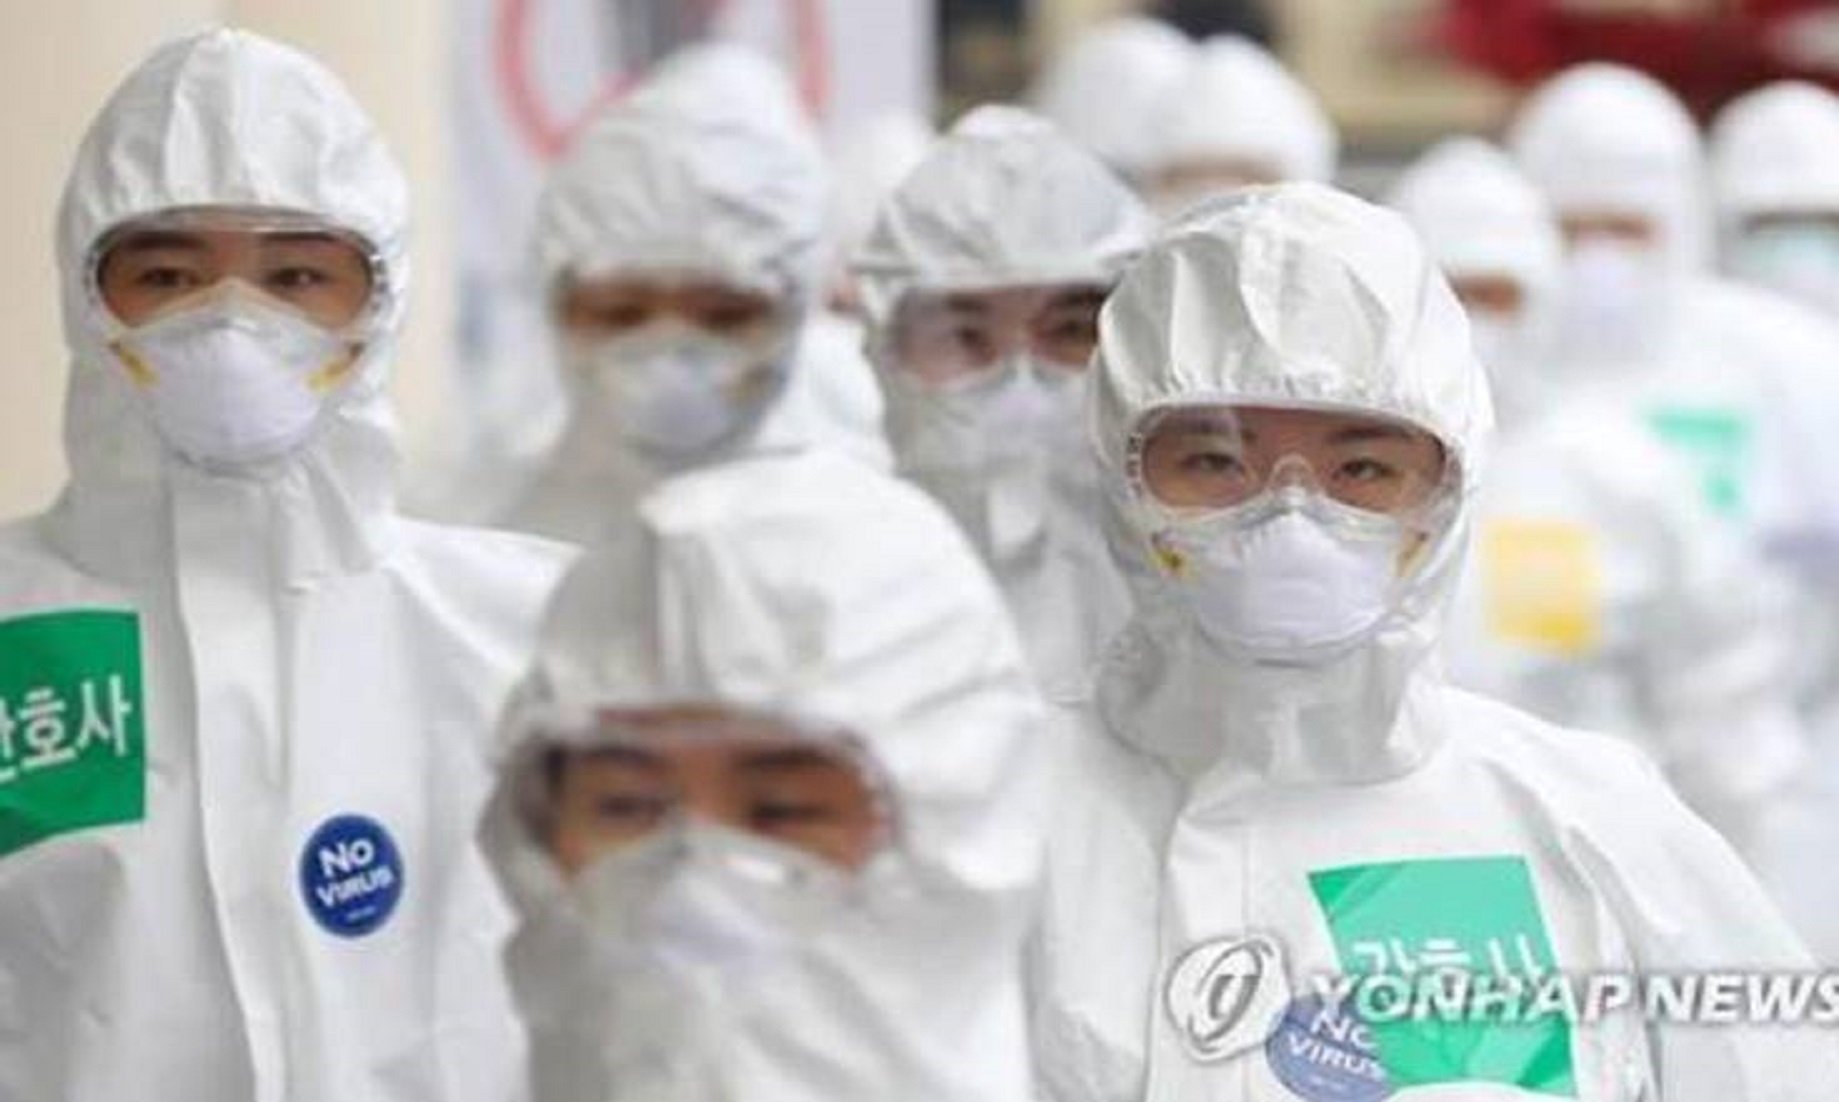 S.Korea Reports 25 More COVID-19 Cases, 10,537 In Total